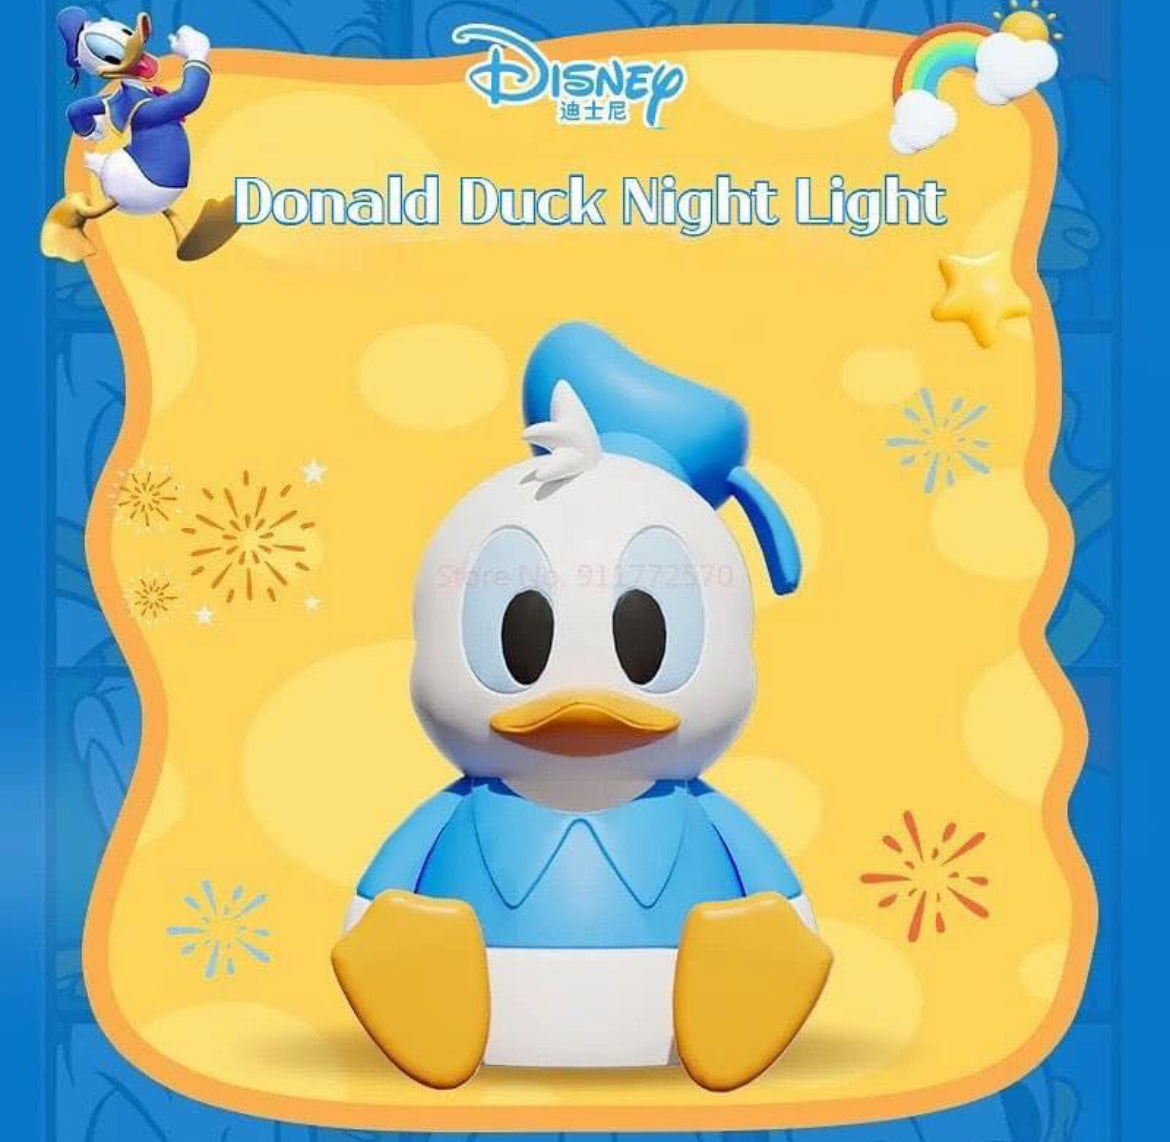 Disney License Donald Duck 2in1
Mood Lamp and Smartphone Holder